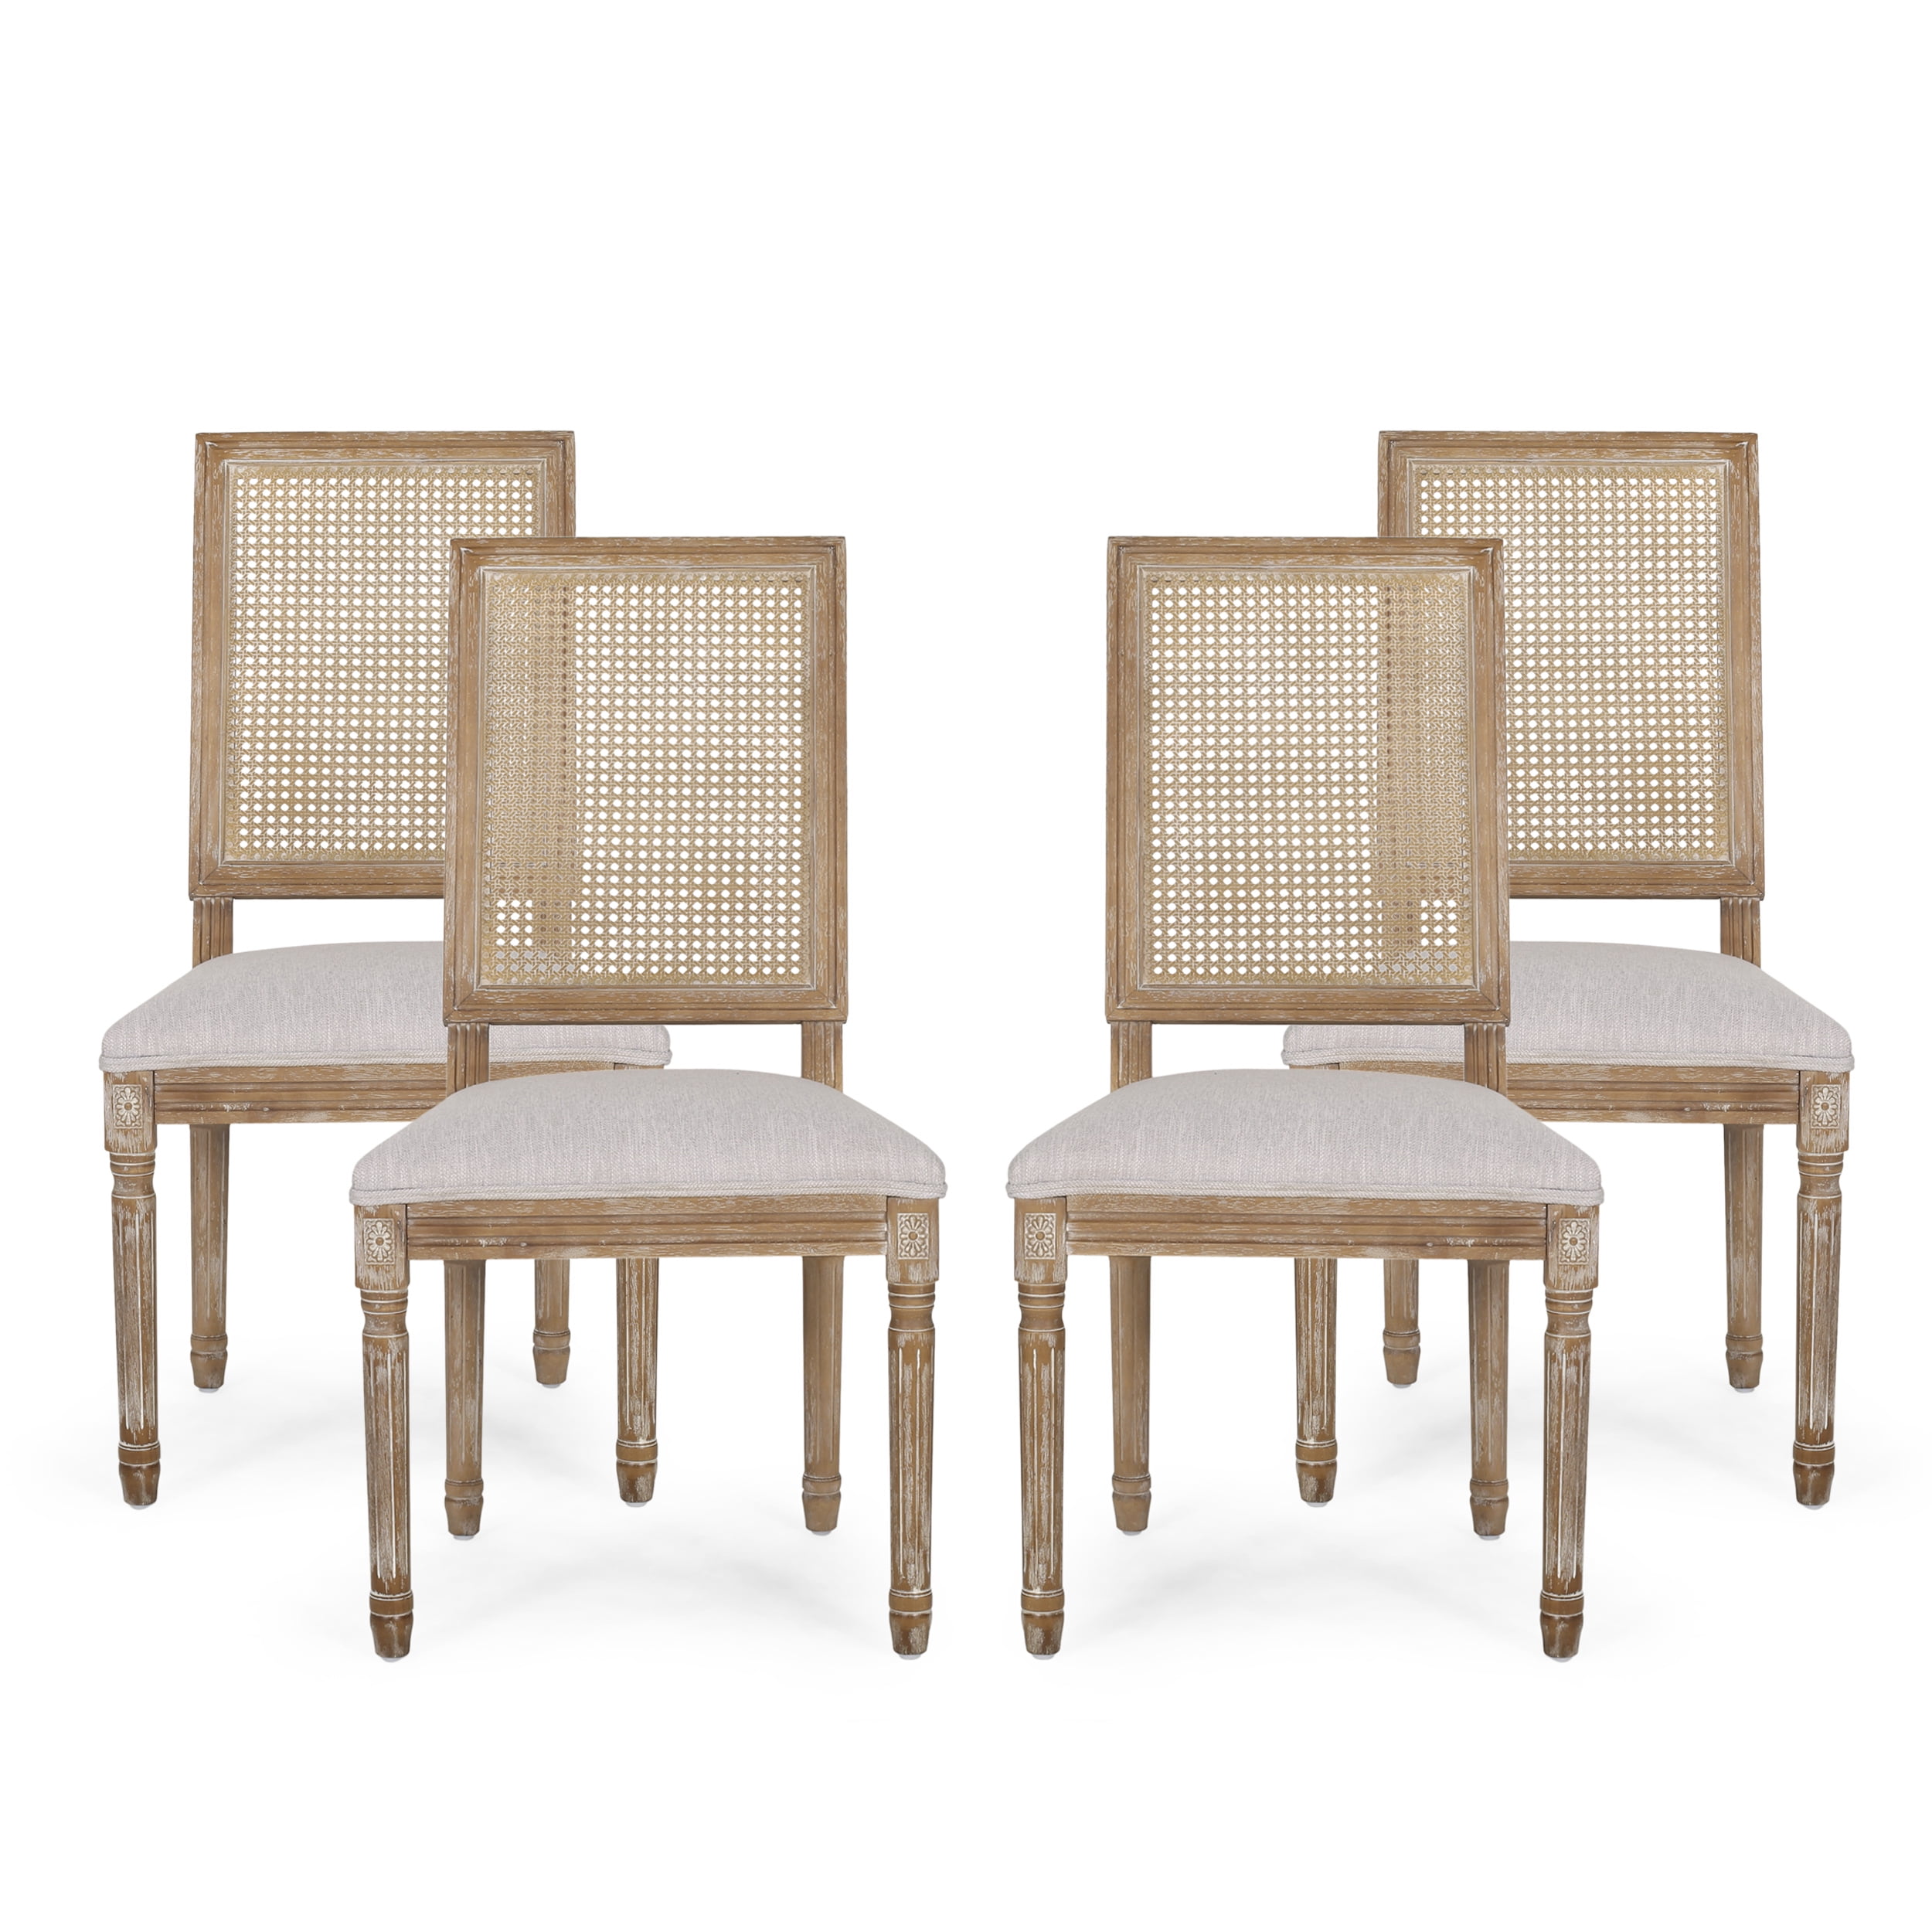 Cane Upholstered Dining Chair Set, Light Wood Dining Chairs Set Of 4